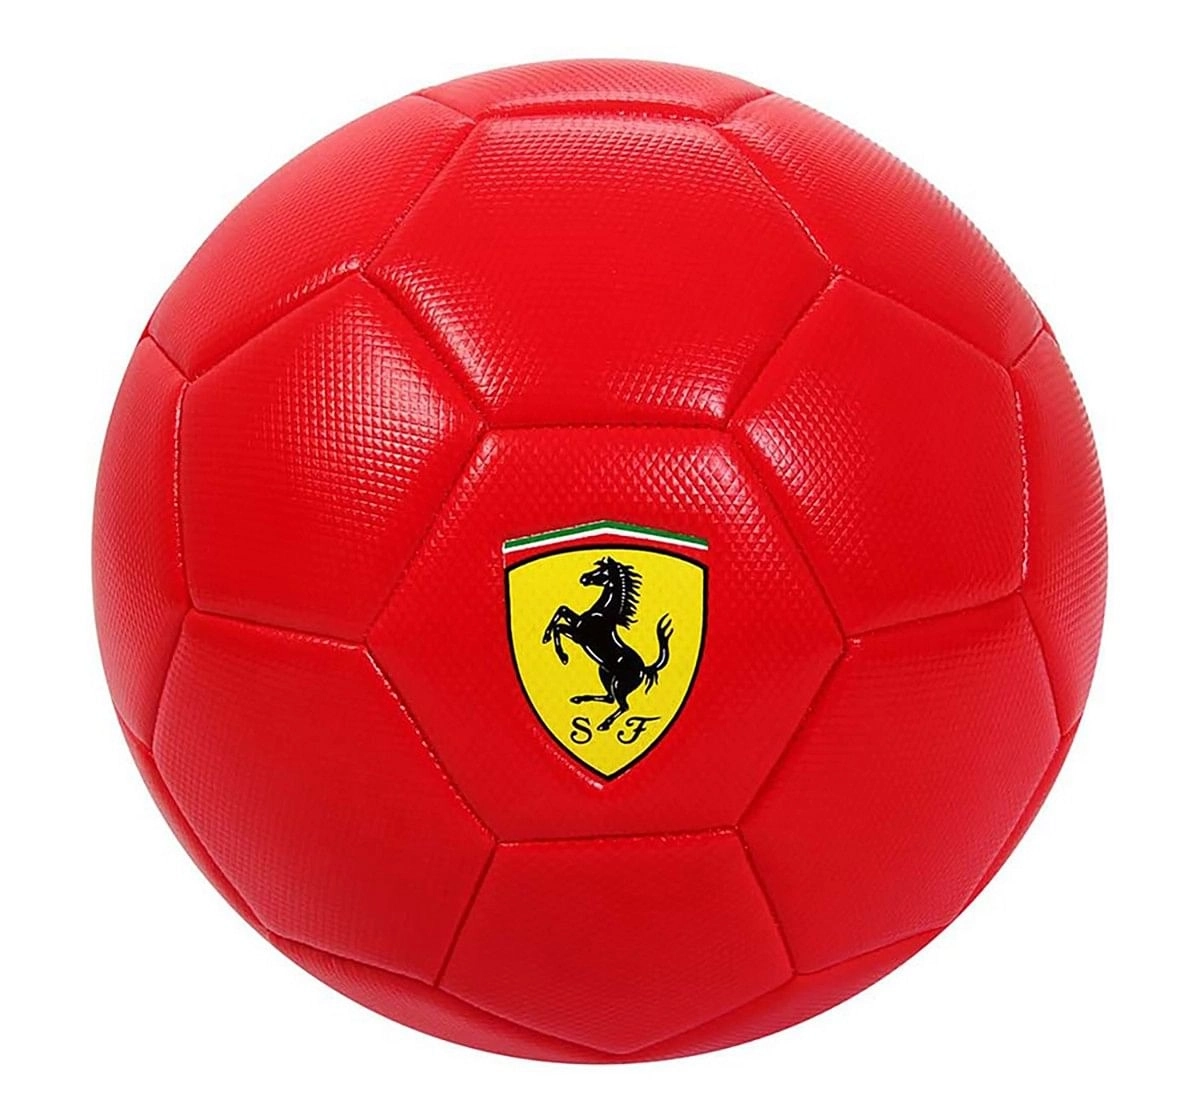 Ferrari Soccer Ball Size 5 Red Ball Sports & Accessories for Kids age 3Y+ 